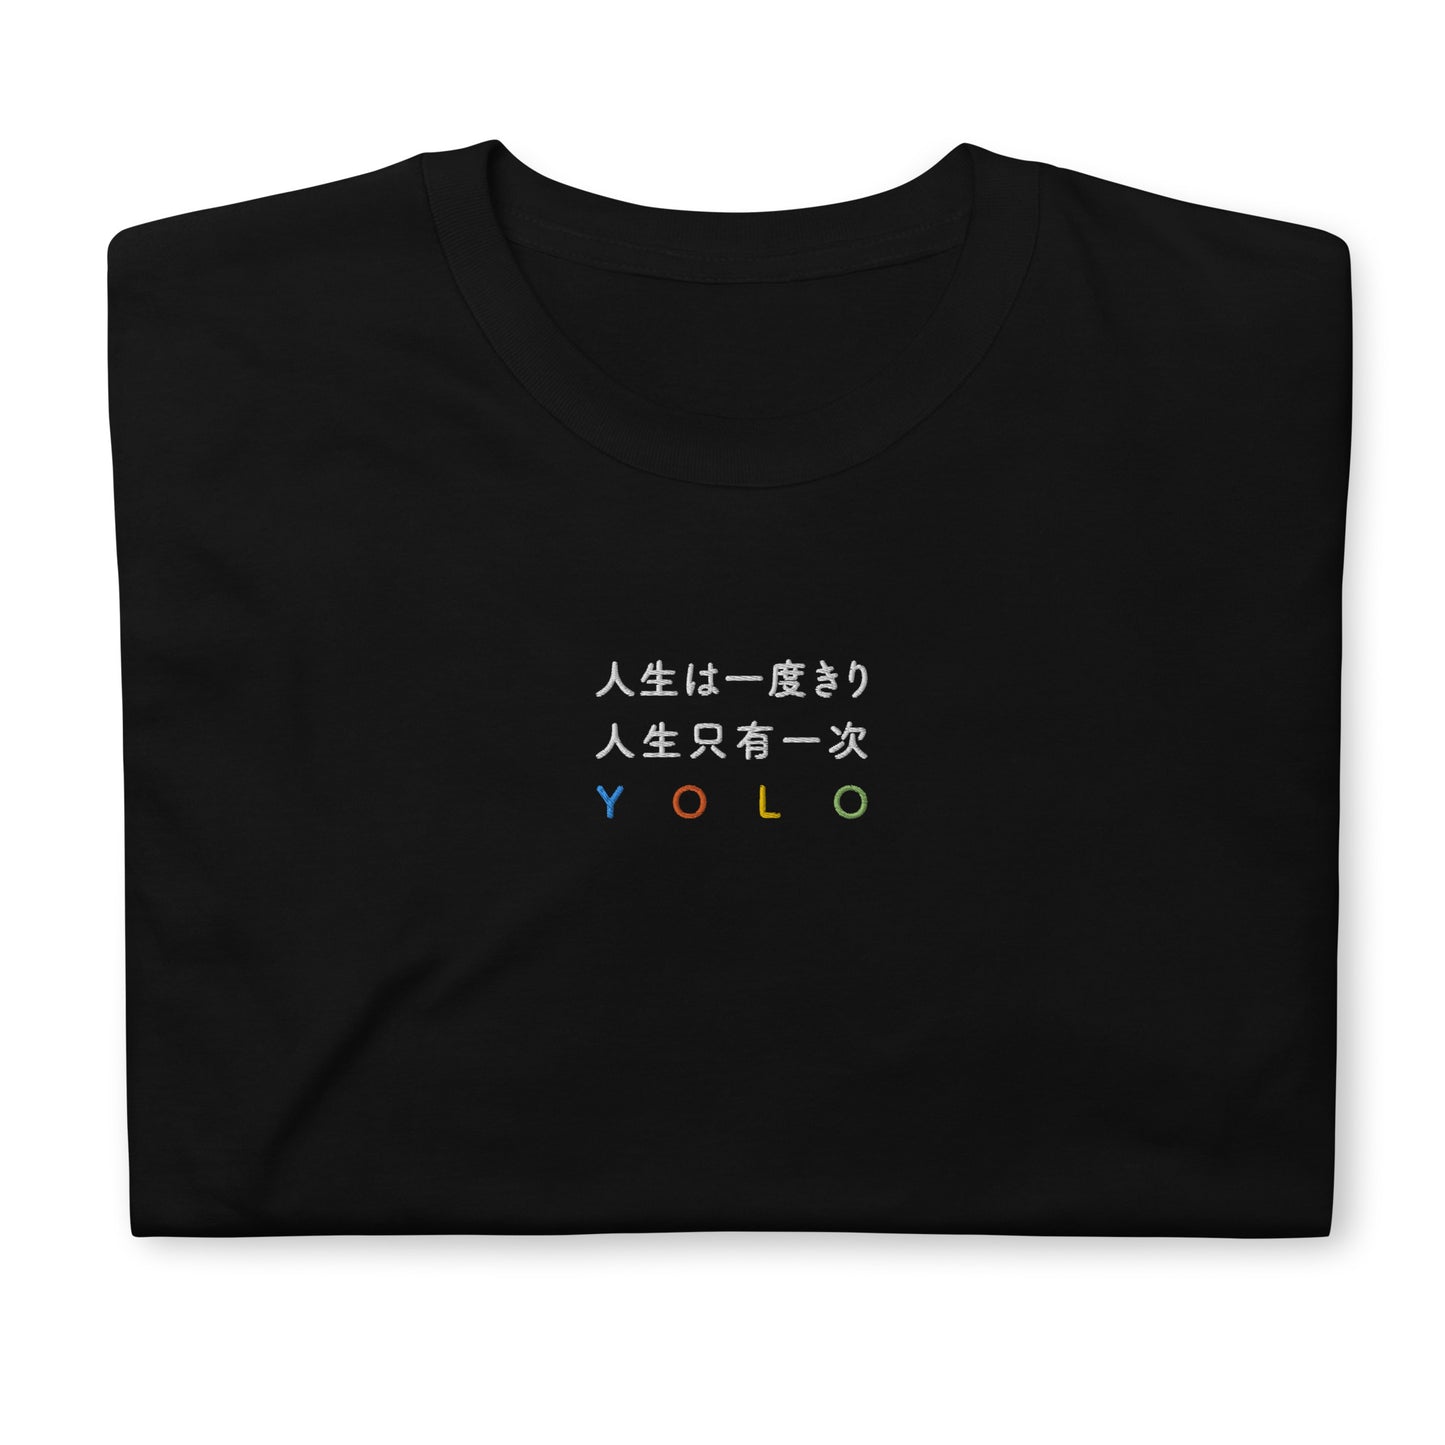 Black High Quality Tee - Front Design with an White, Light Blue, Orange, Yellow, Light Green Embroidery "YOLO" in Japanese,Chinese and English